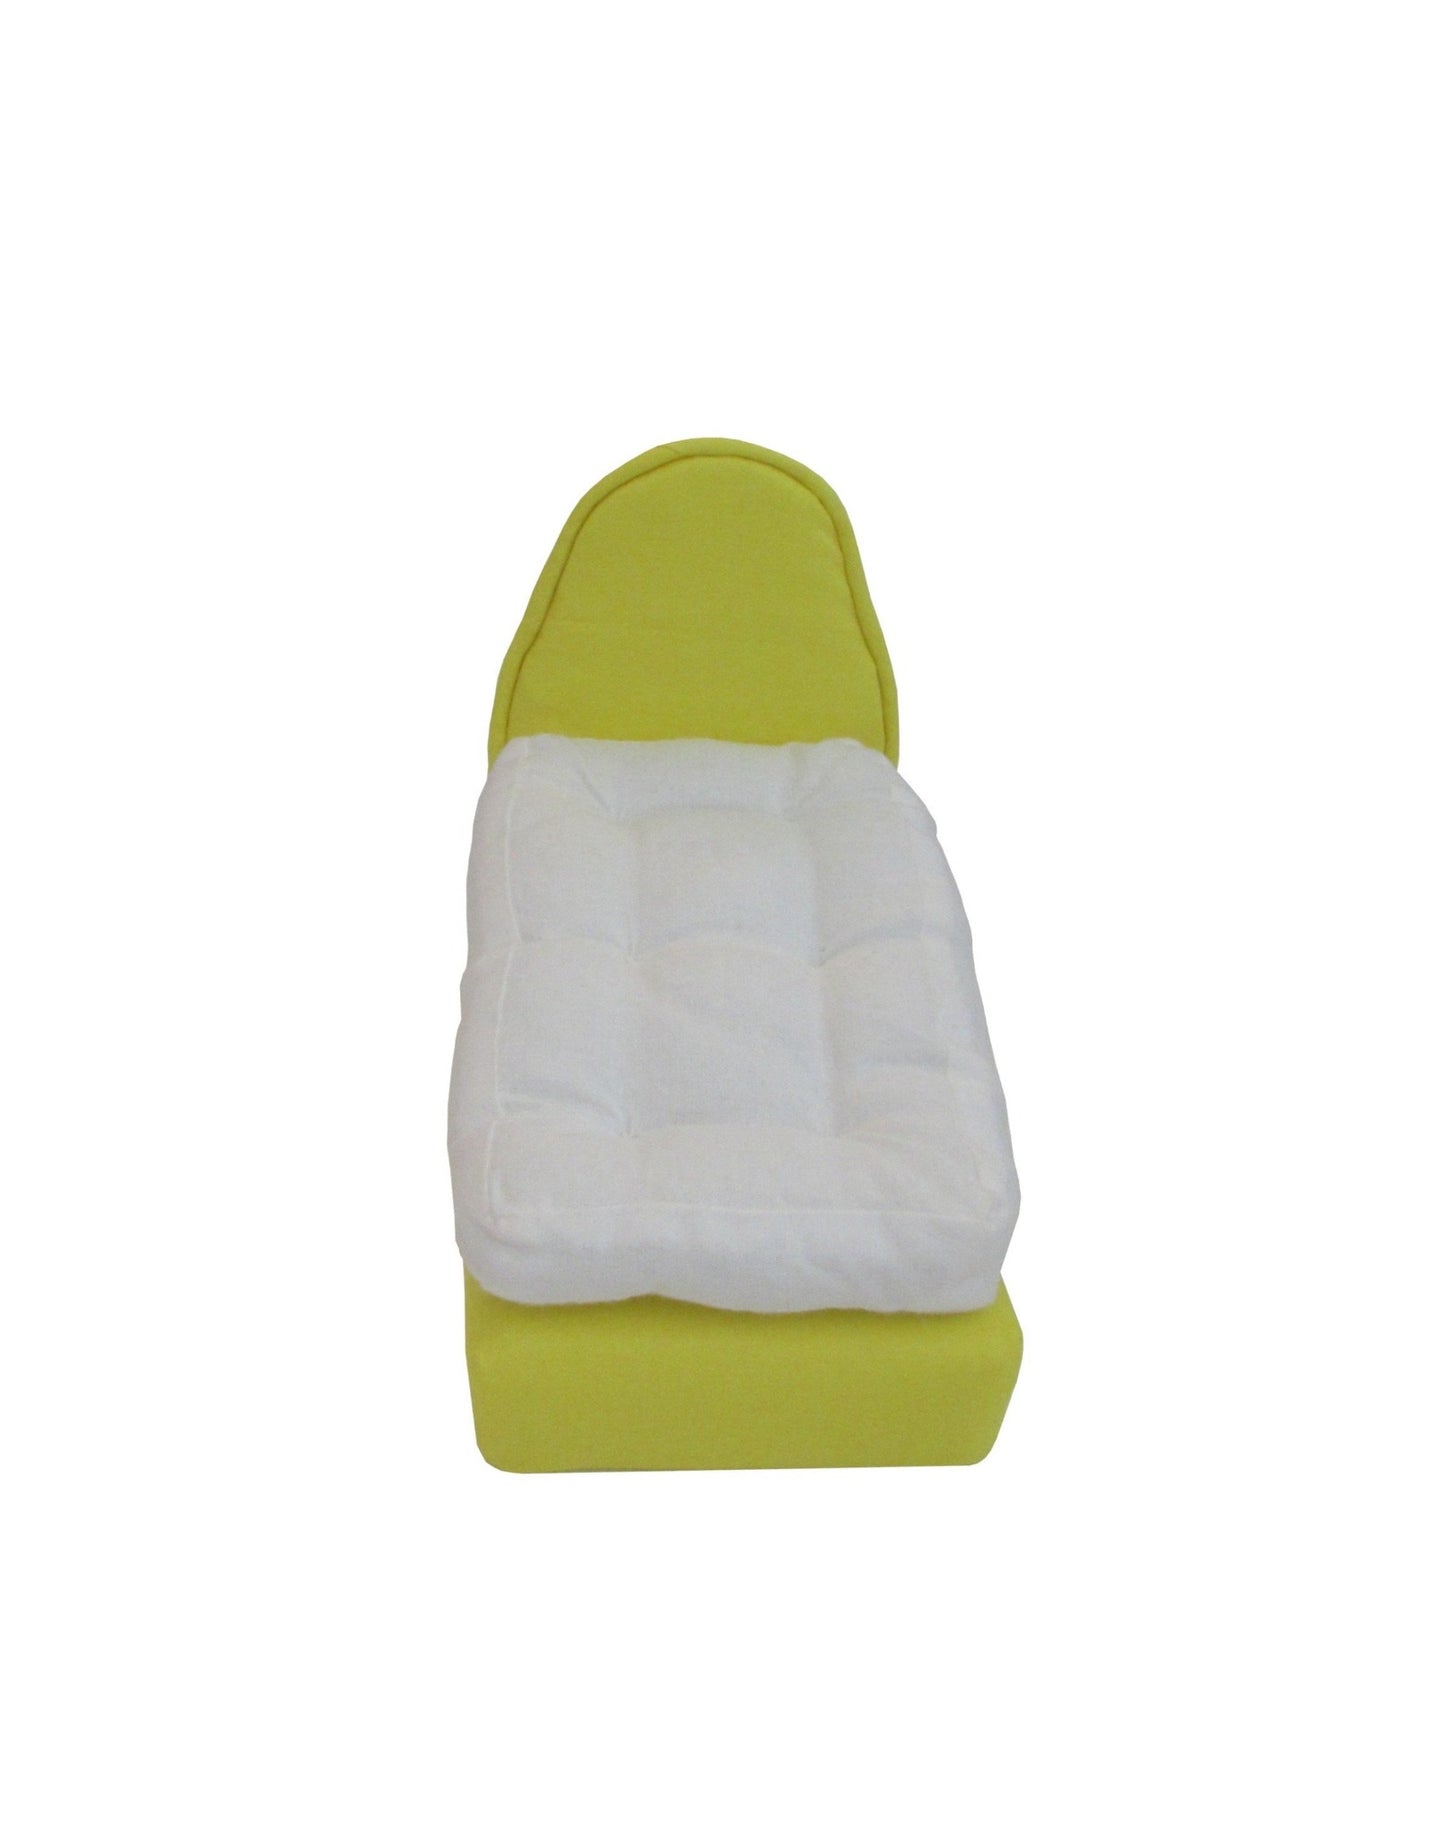 Bright Yellow Doll Bed for 6 1/2-inch dolls